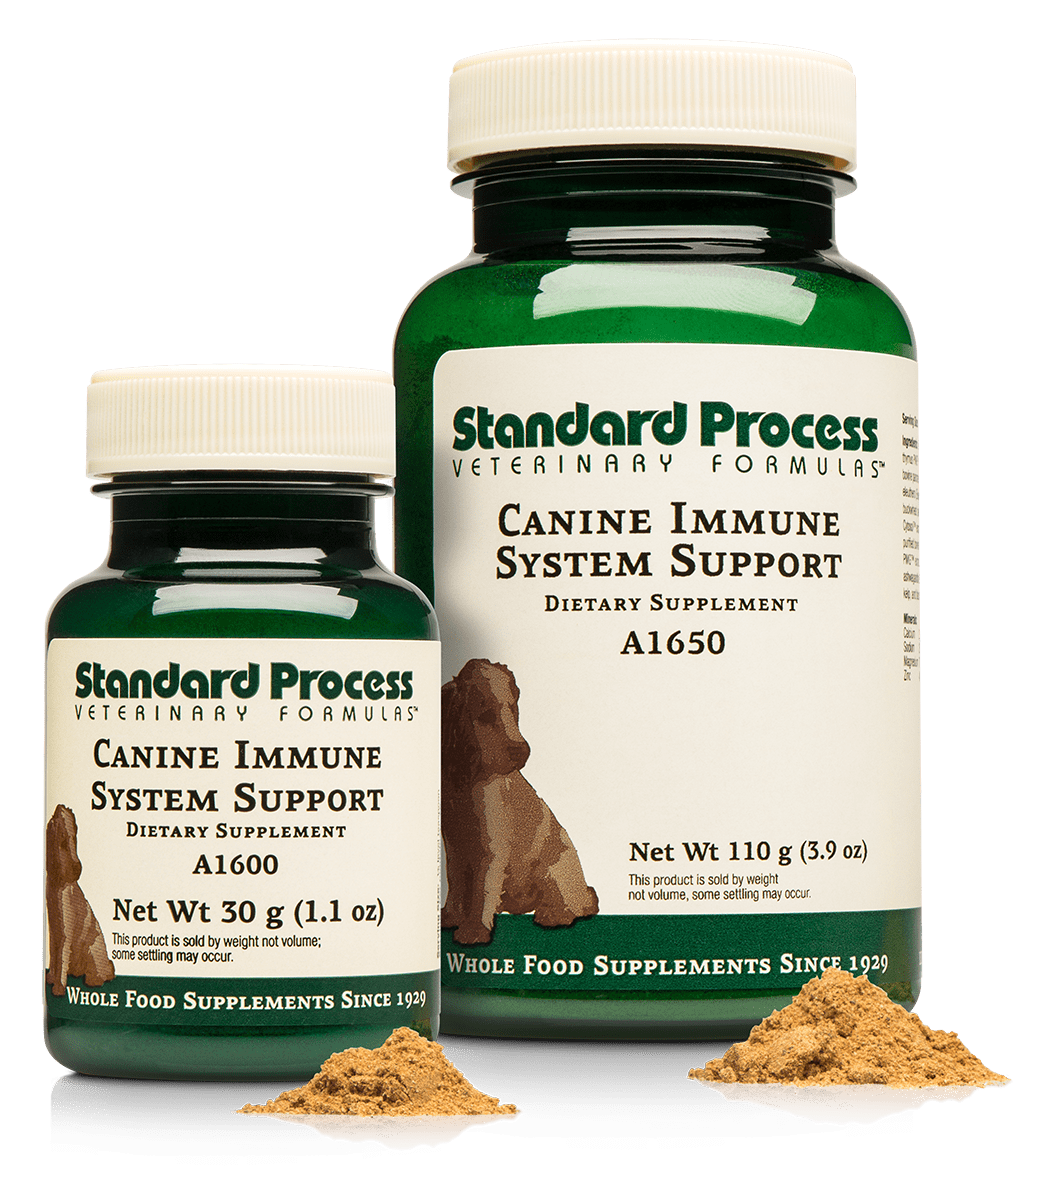 Standard Process Canine Immune System Support 30g powder